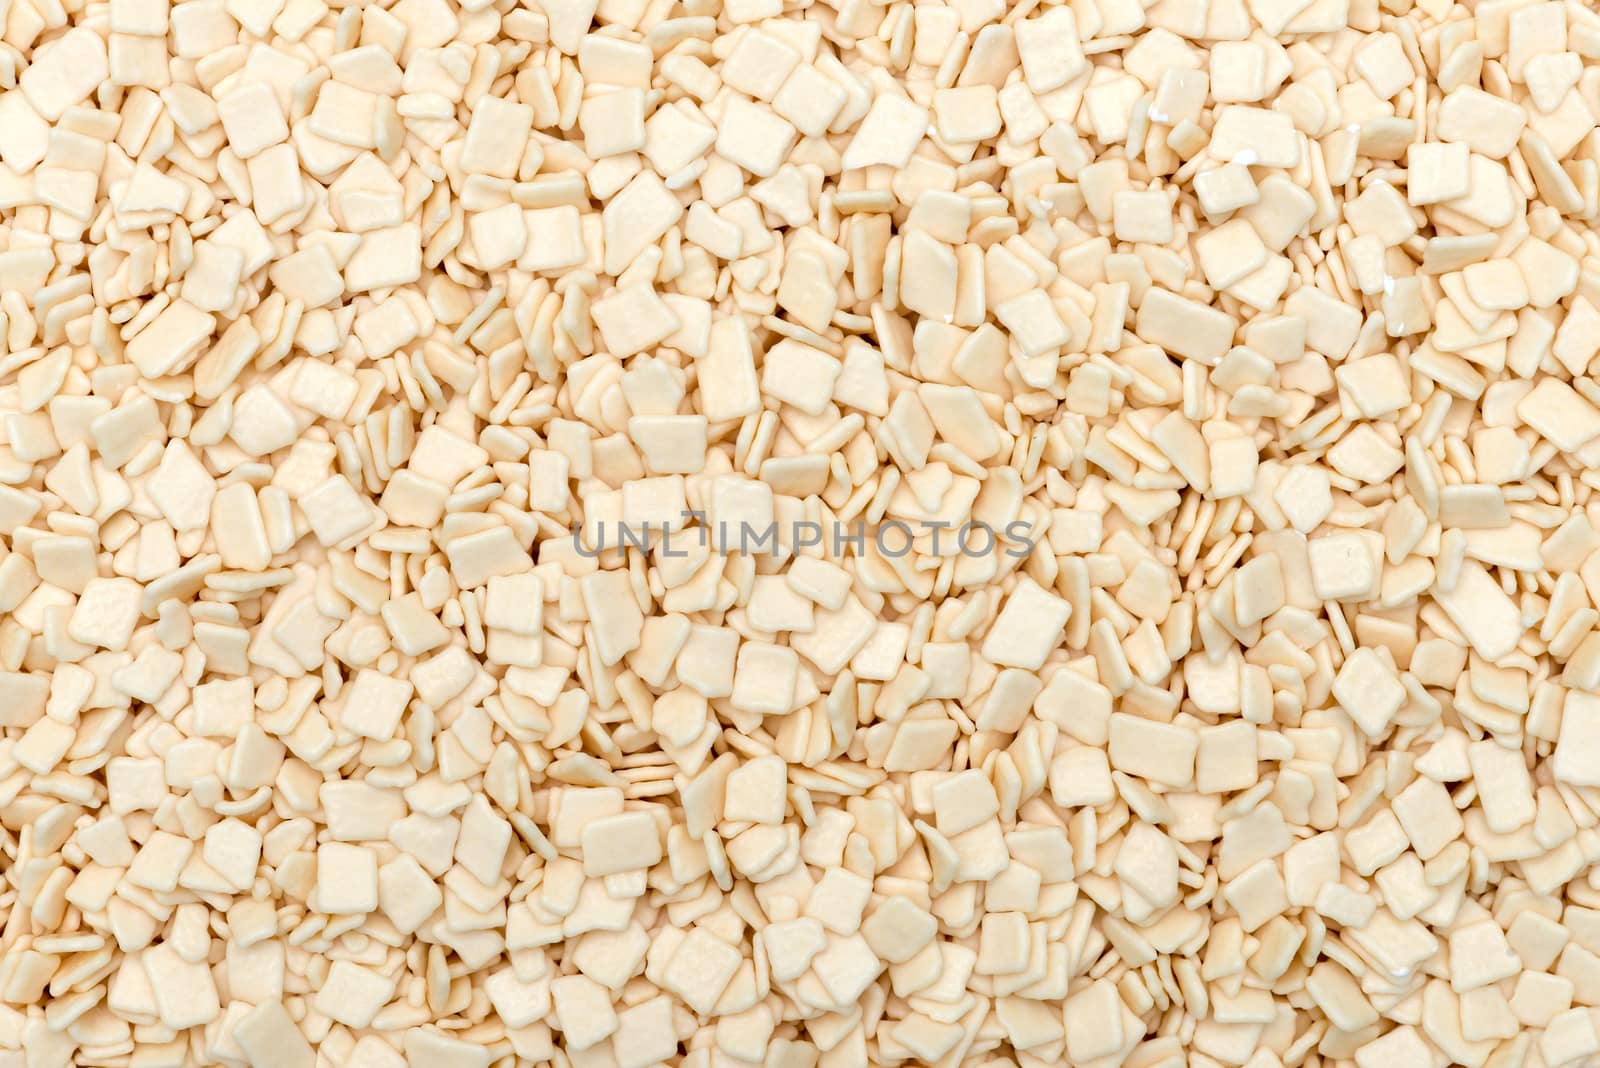 White chocolate chips as an abstract background texture